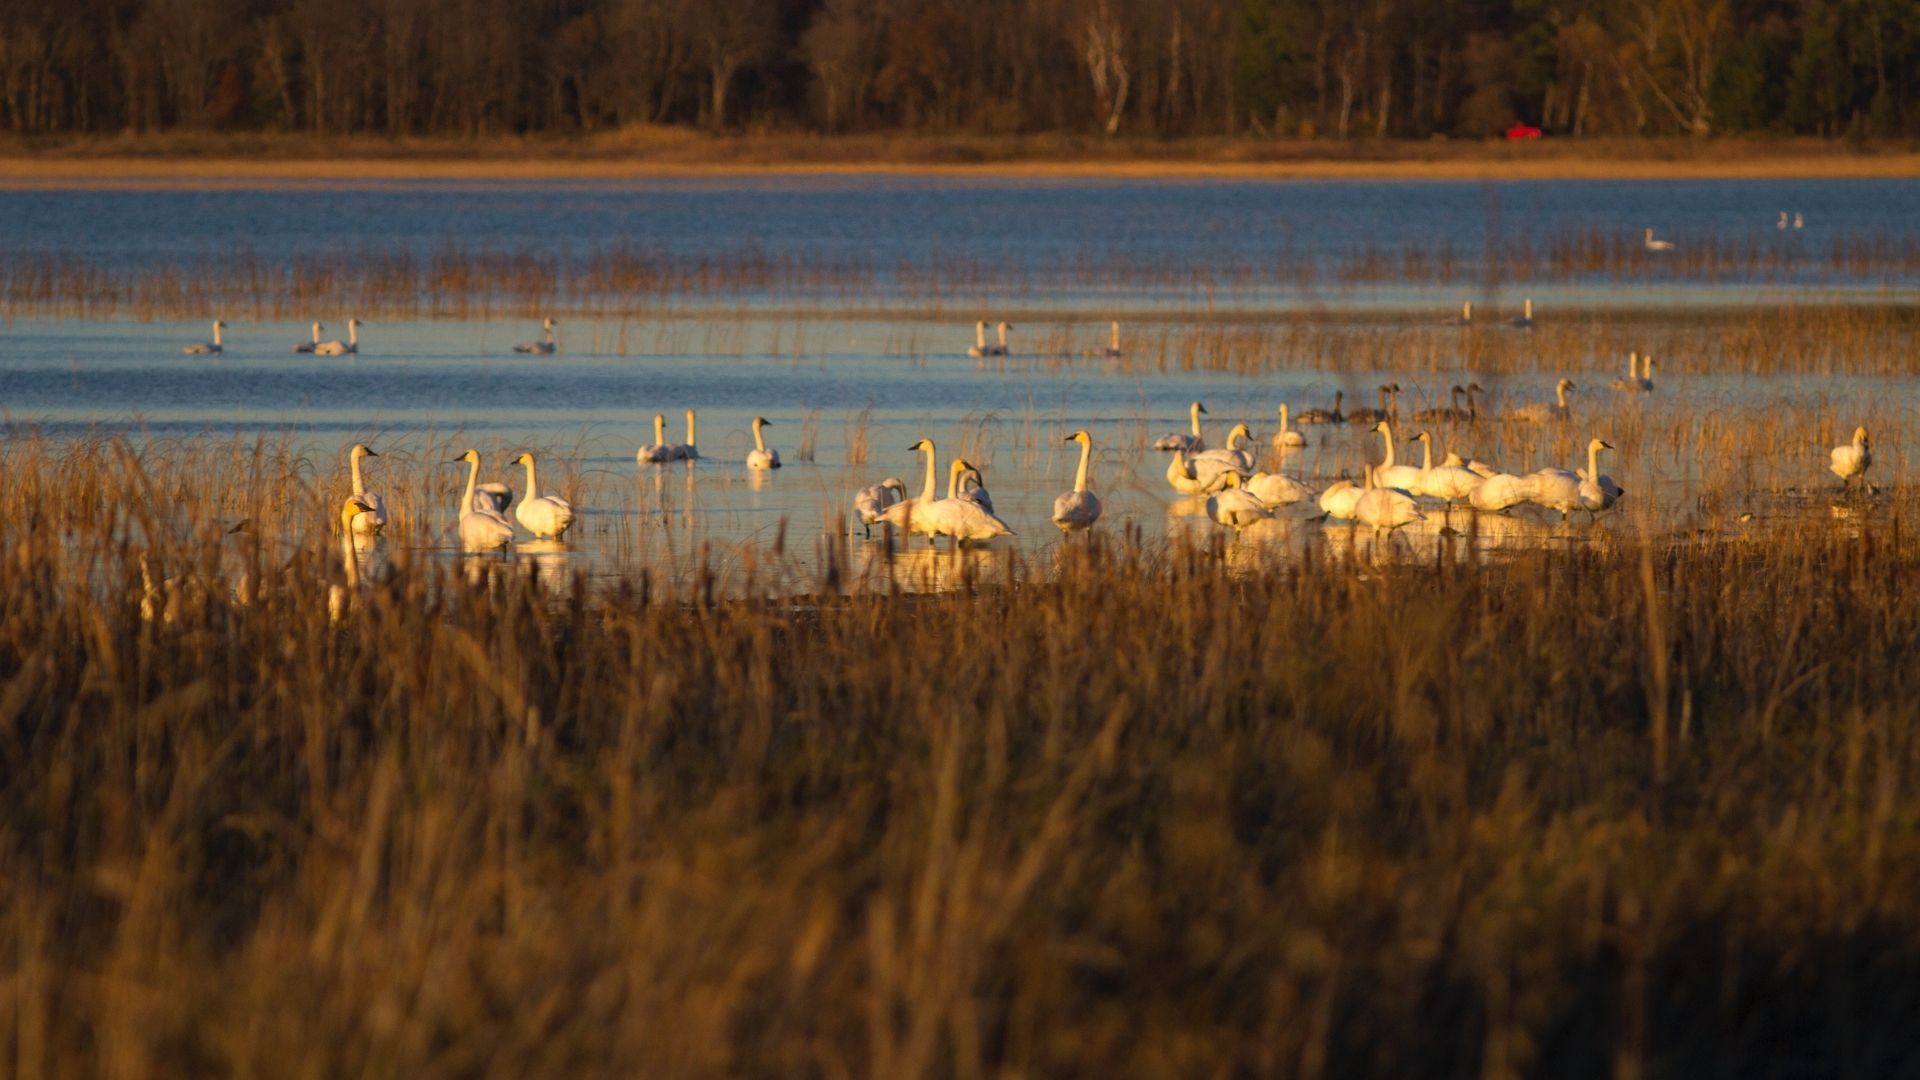 A flock of swans floating on water, around tall grass.